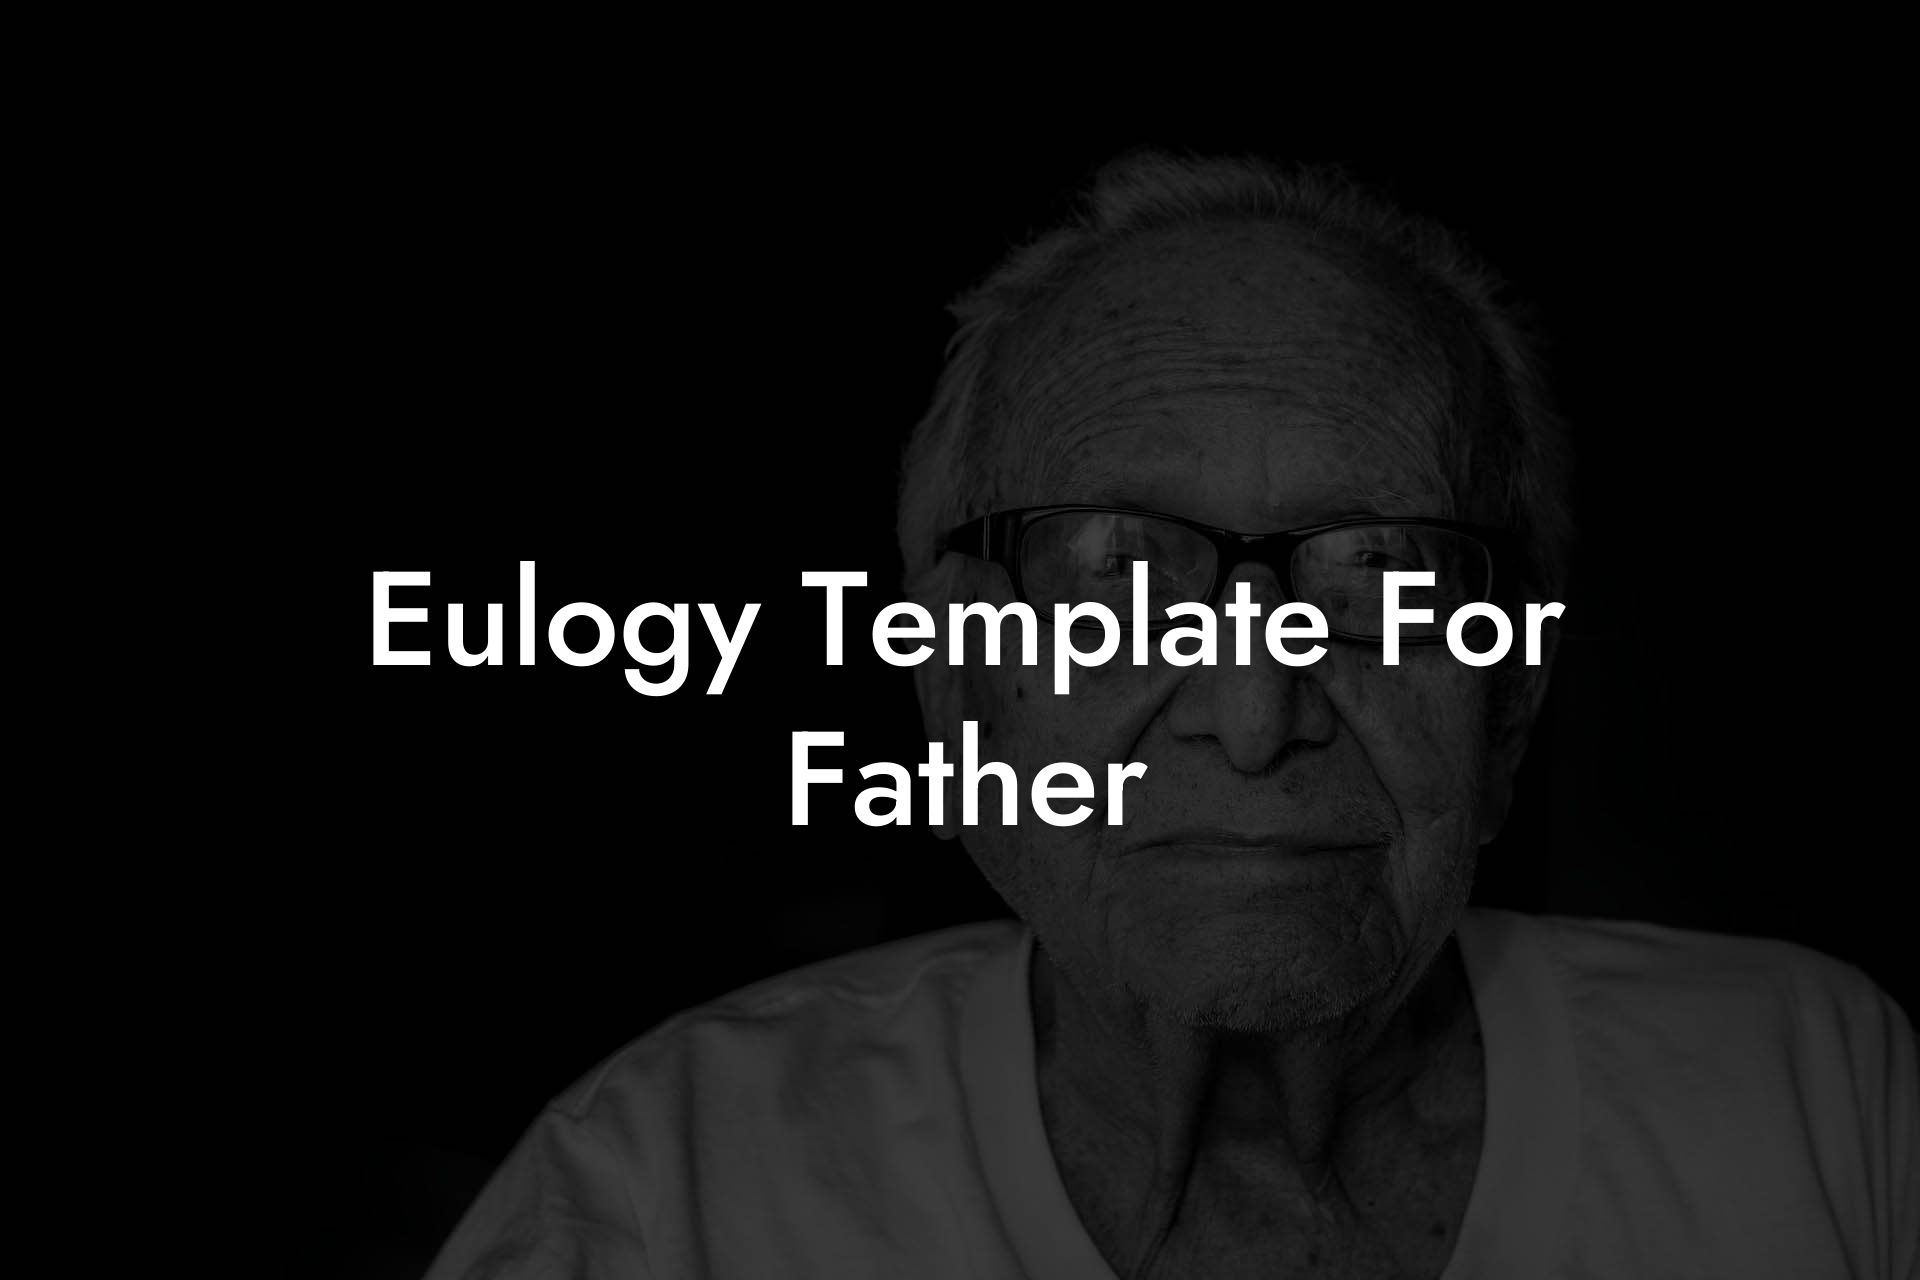 Eulogy Template For Father